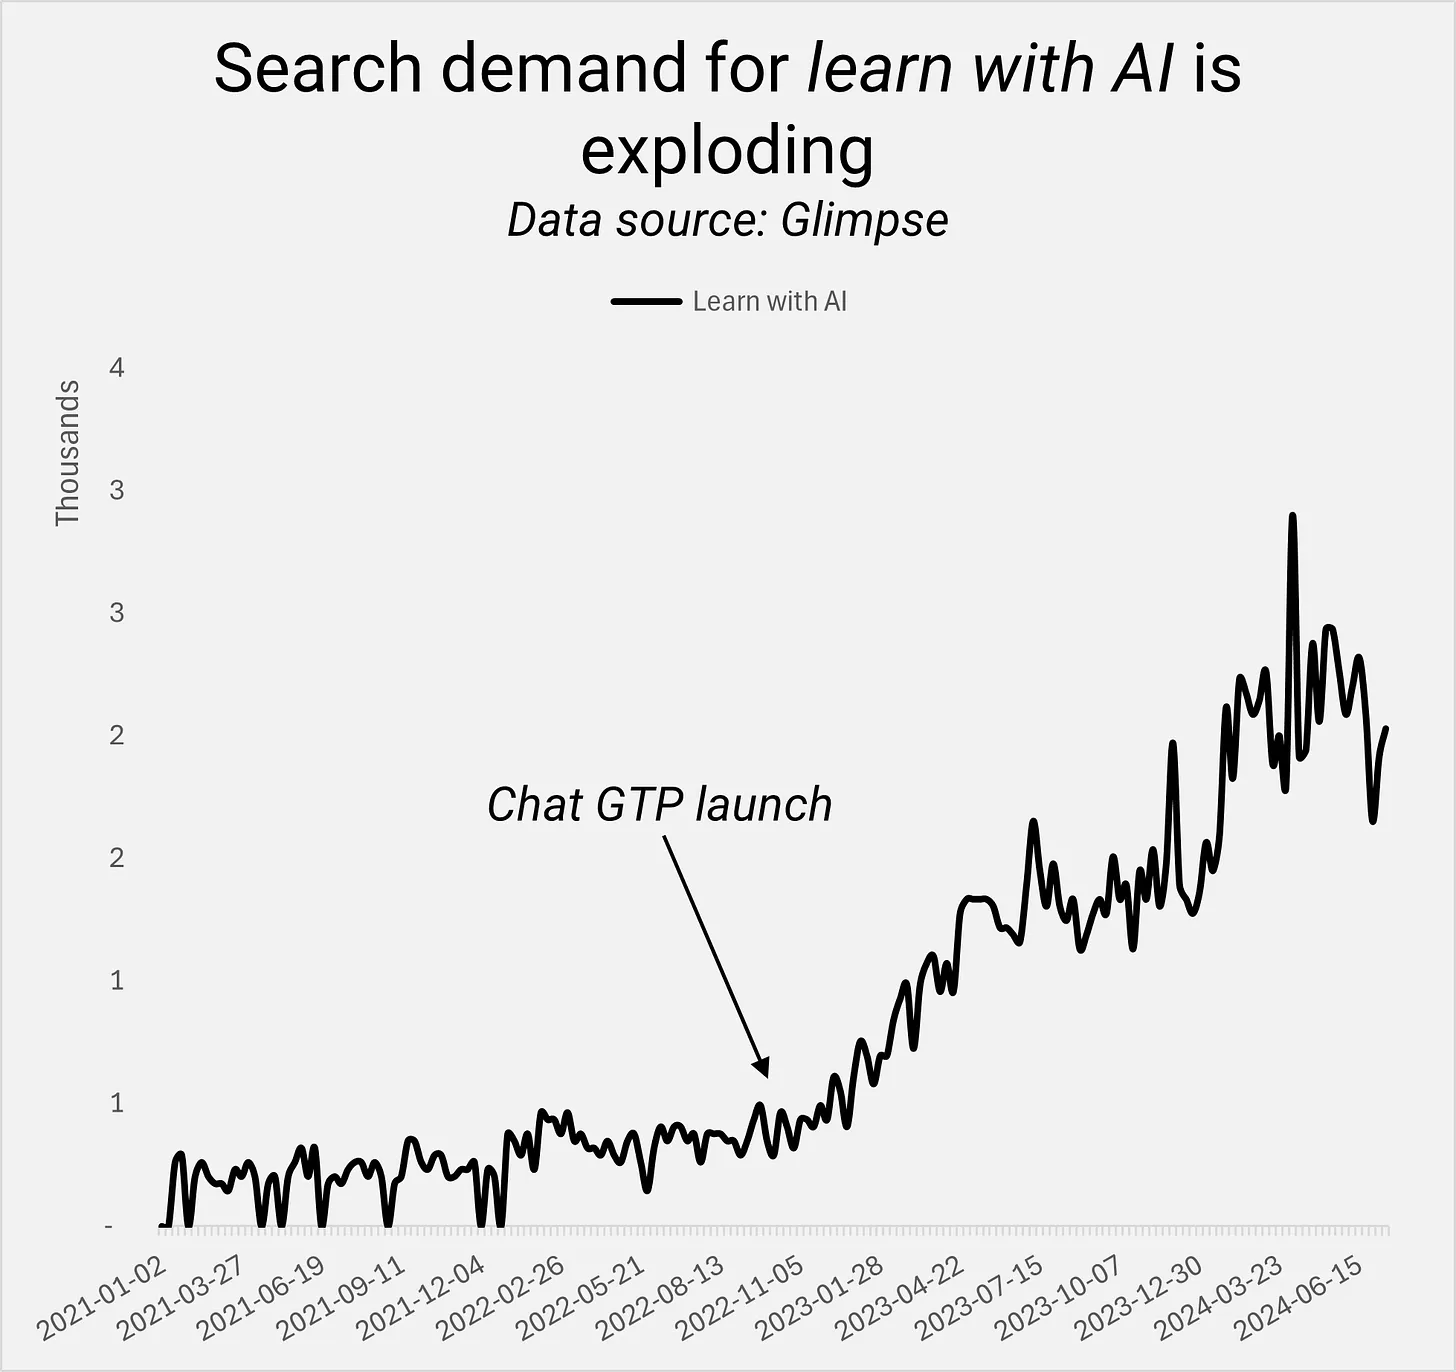 Search demand for learn with AI is exploding